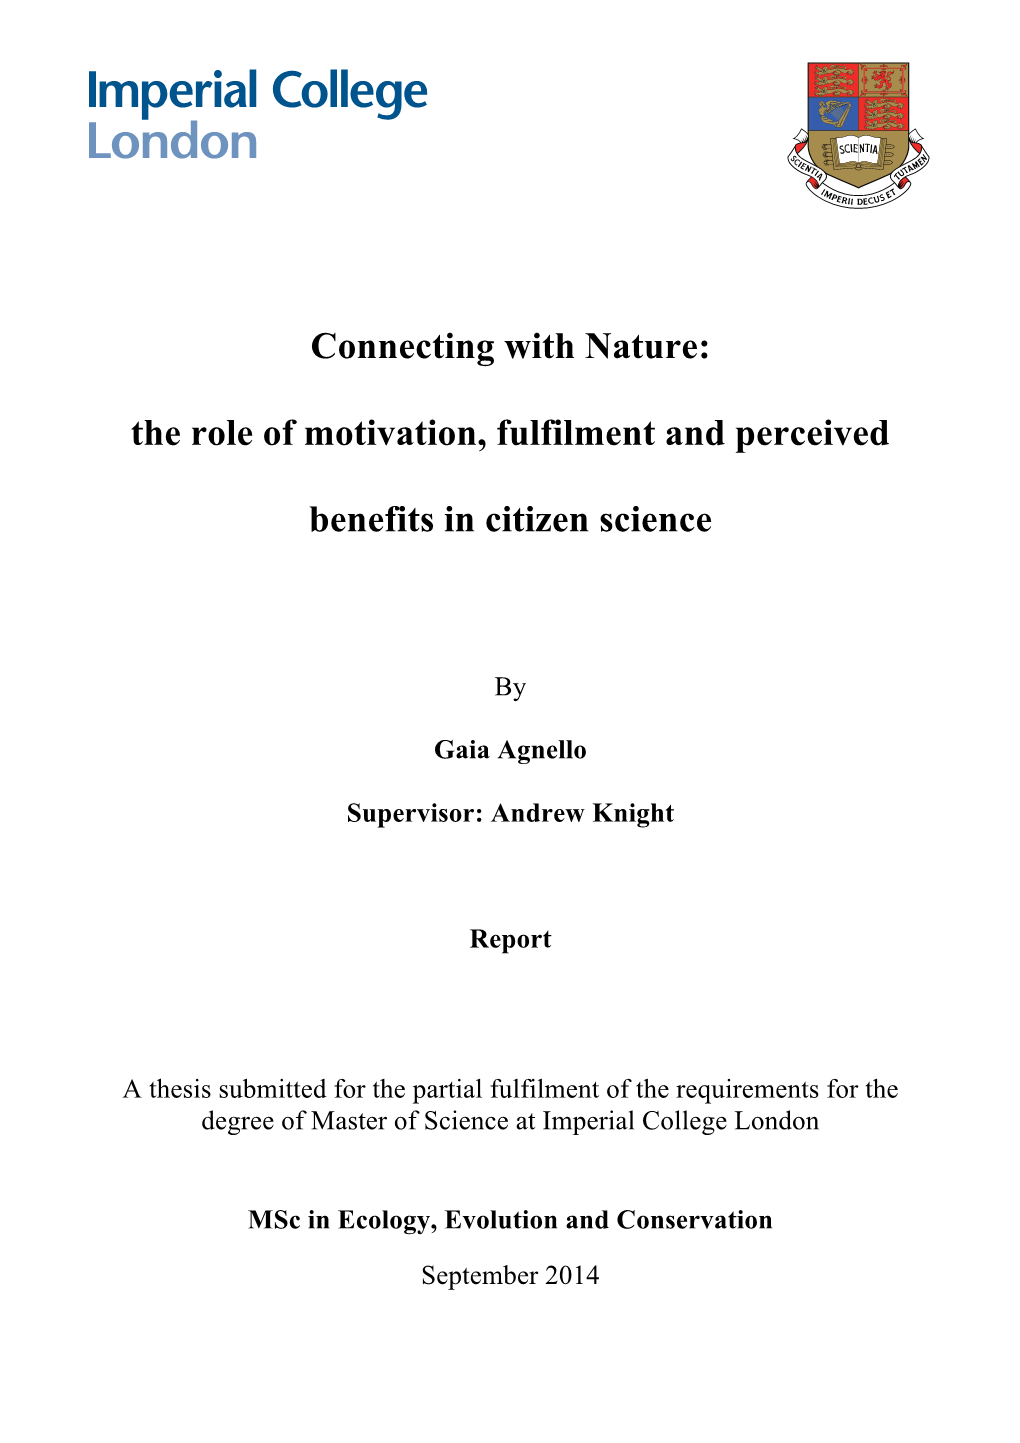 The Role of Motivation, Fulfilment and Perceived Benefits in Citizen Science